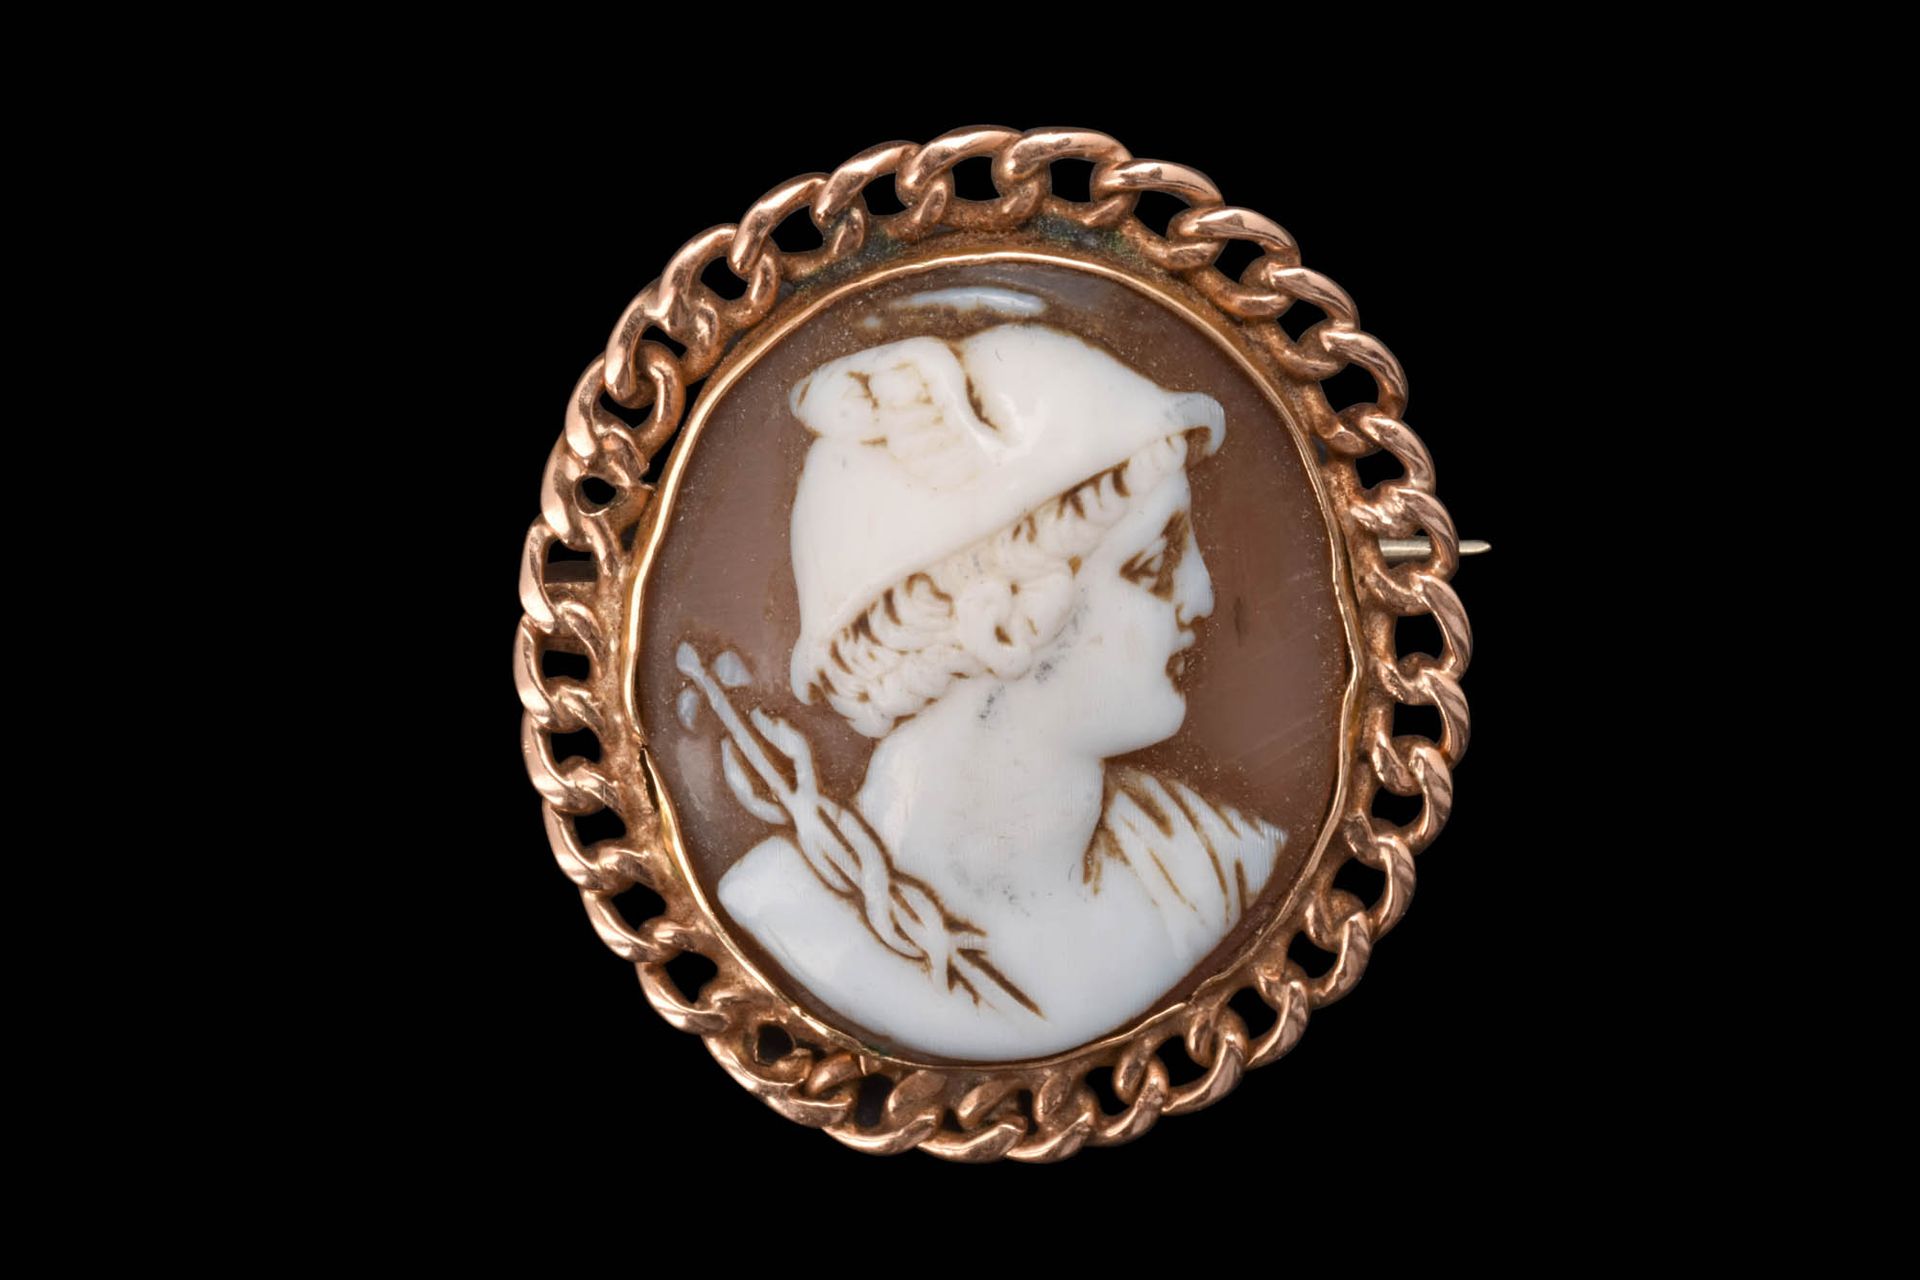 NEOCLASSICAL GOLD BROOCH WITH HERMES CAMEO Ca. AD 1700 - 1800.
A striking cameo,&hellip;